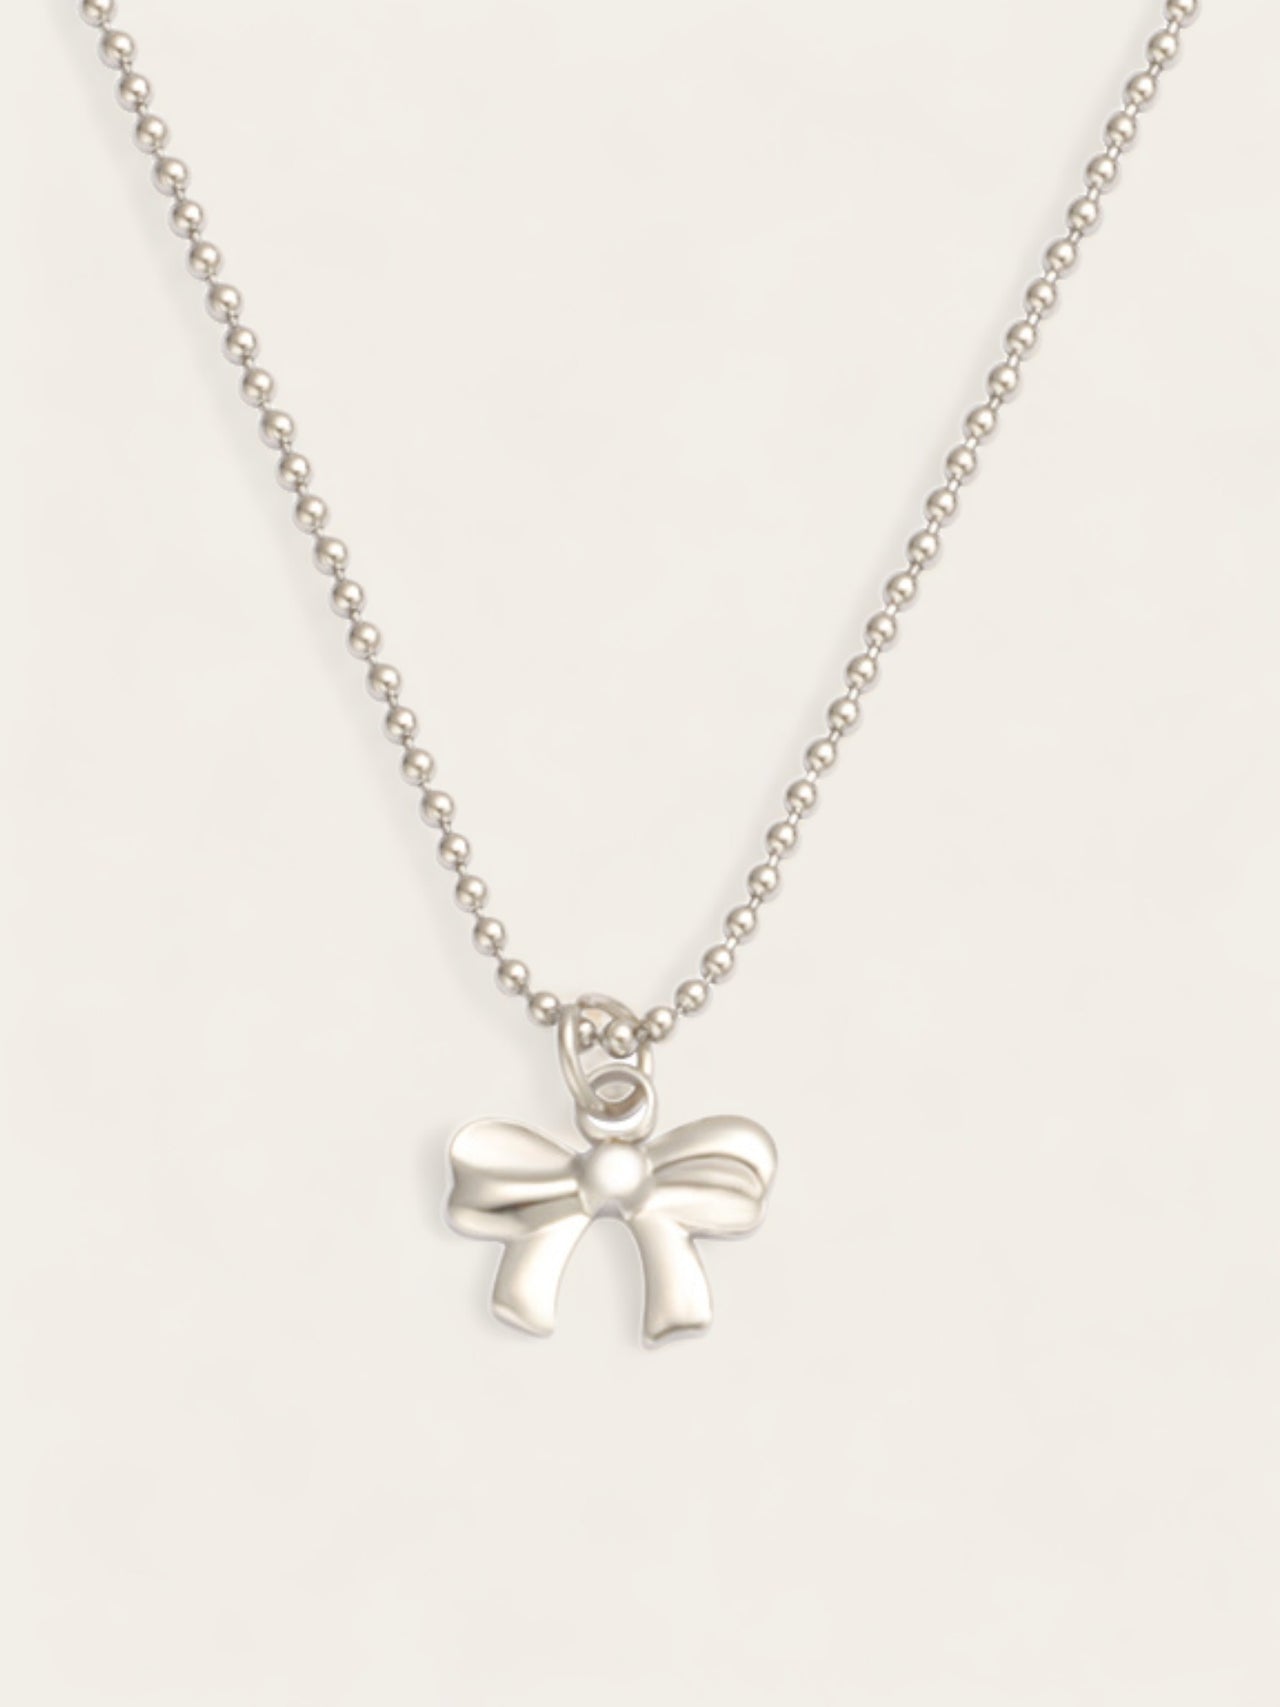 Bead Chain Bow Necklace